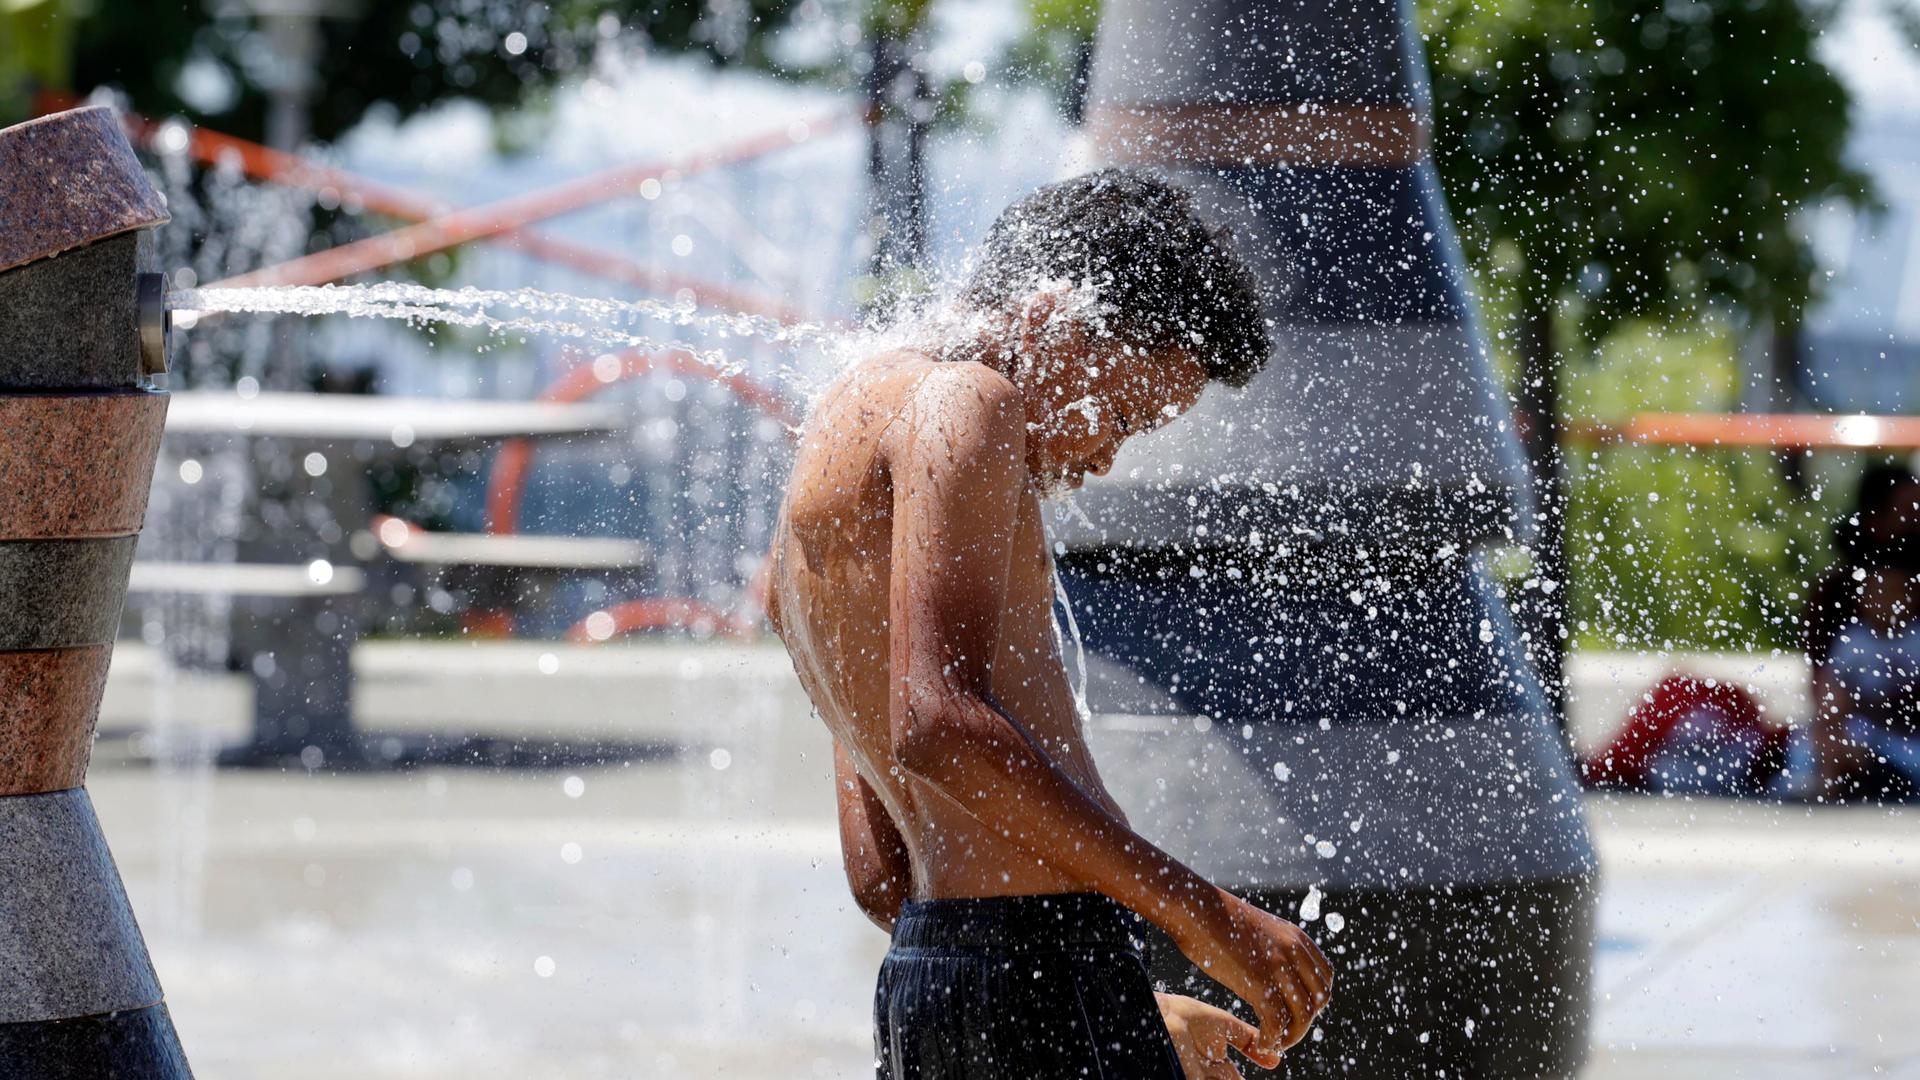 A young person cools off in the Yesler Terrace spray park during a heat wave hitting the Pacific Northwest, Sunday, June 27, 2021, in Seattle.